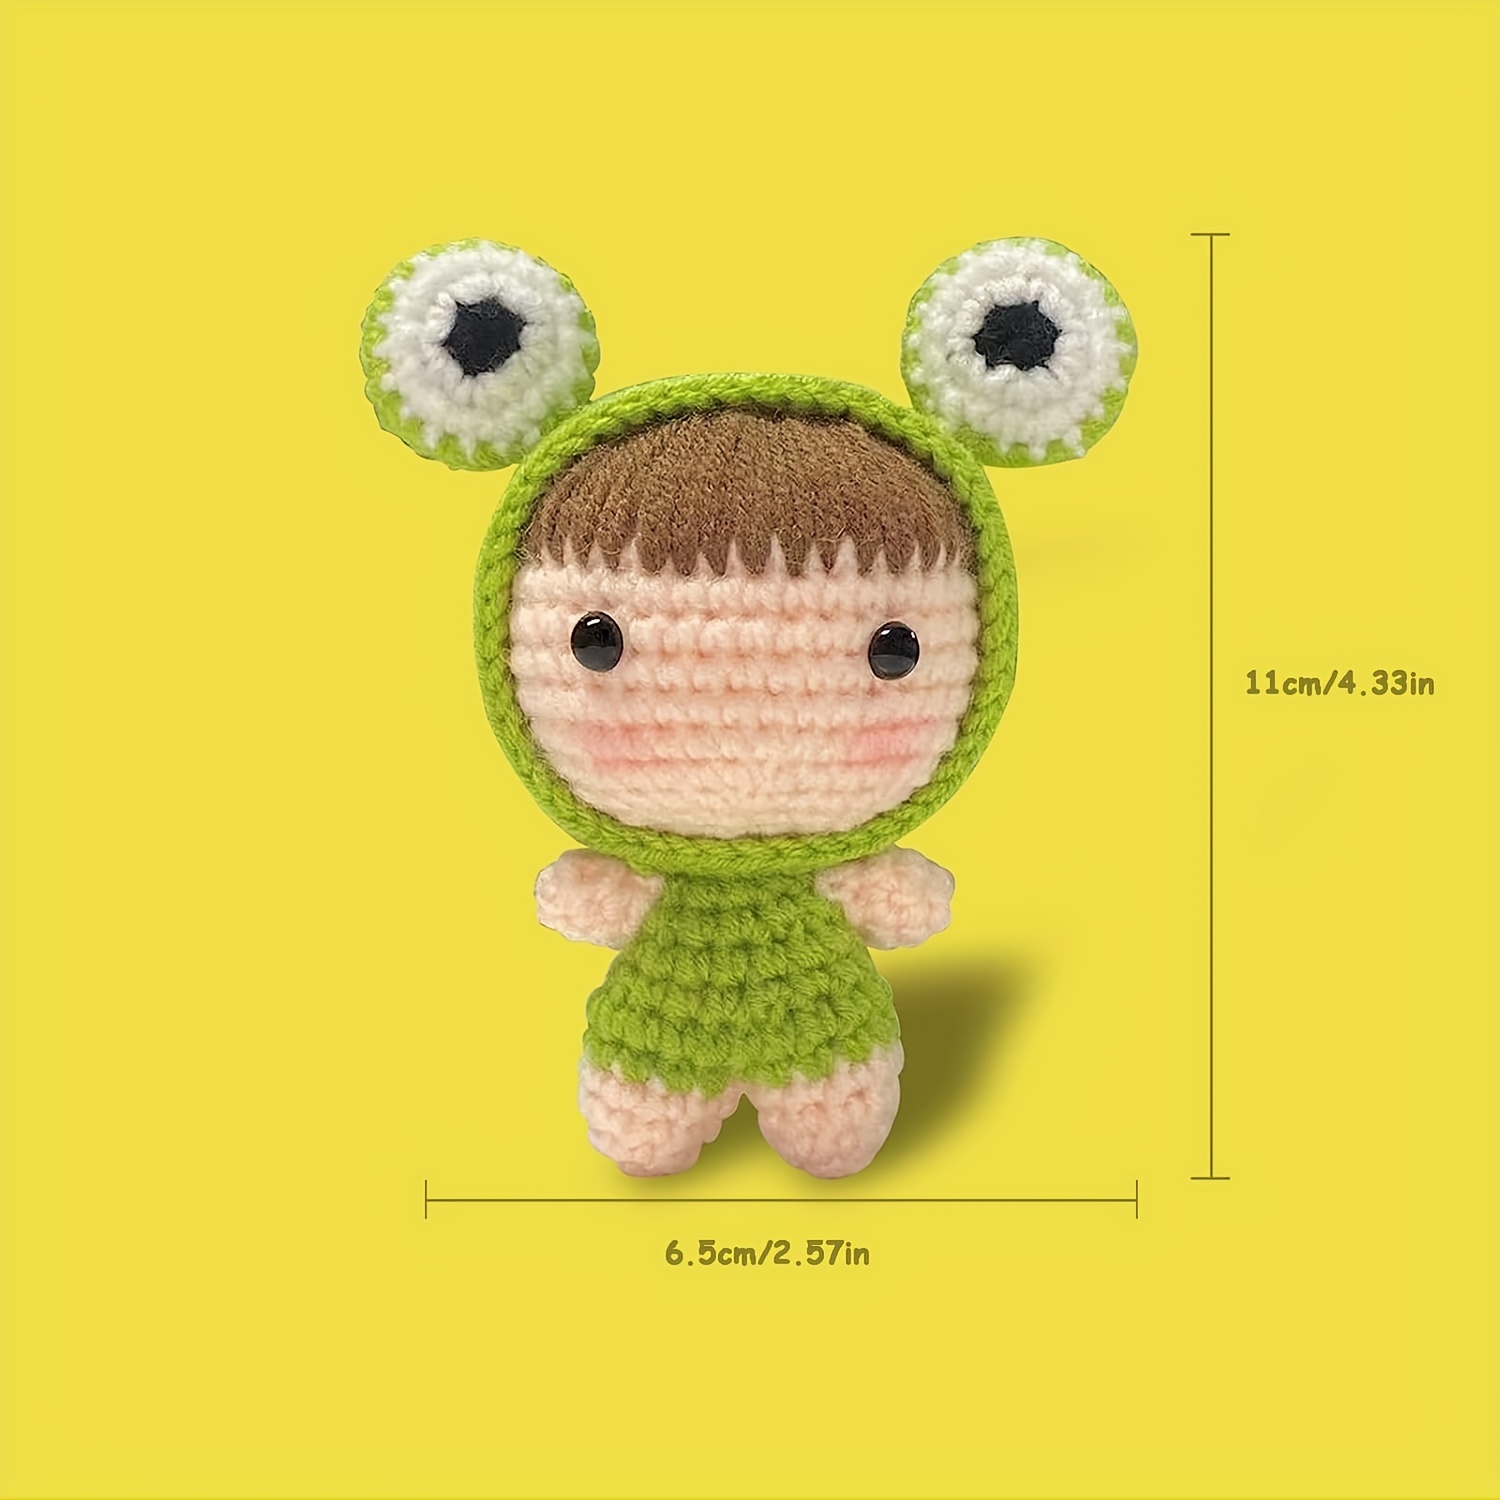 Little Frog Animal Stuffed Toy,DIY Crochet Material Kit with Video